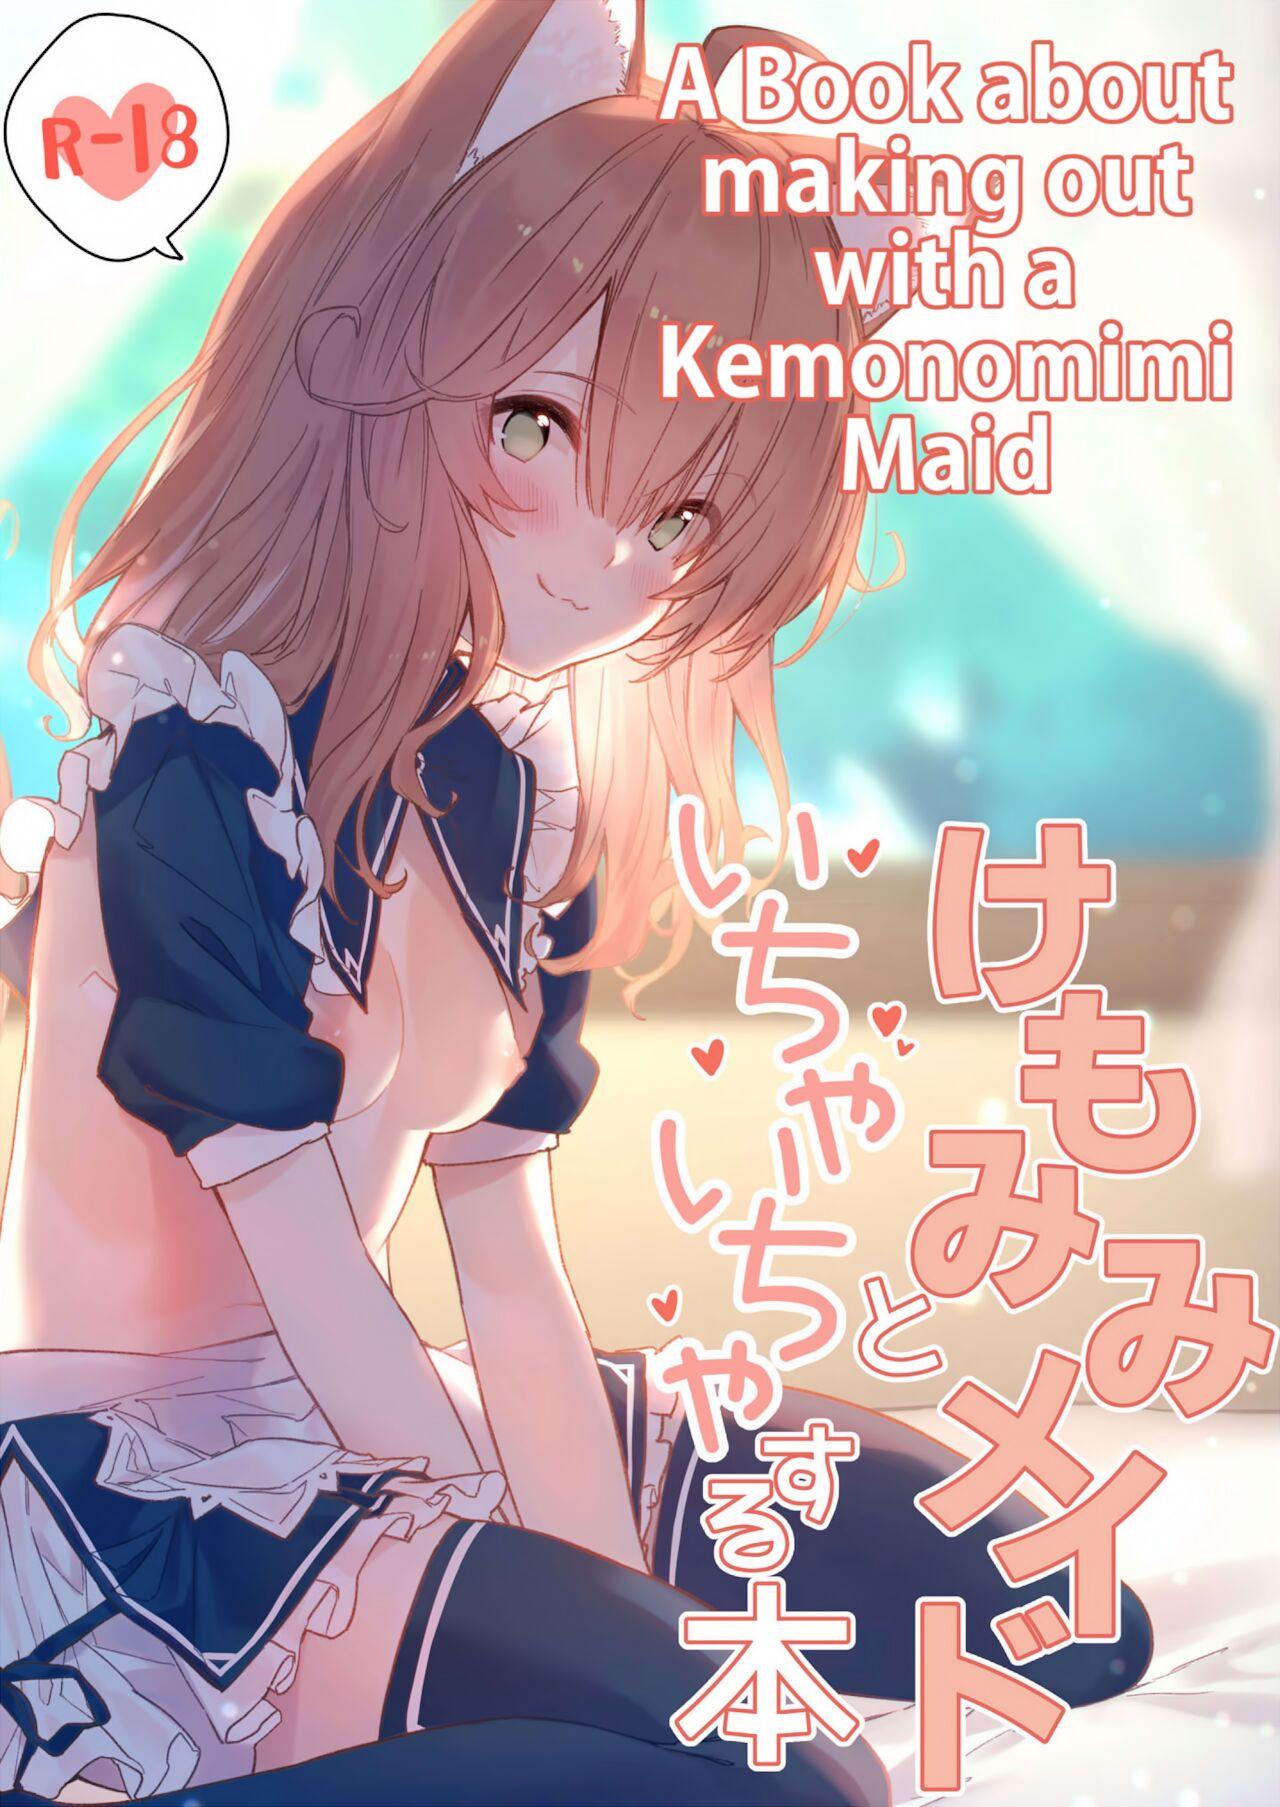 Kemomimi Maid to Ichaicha suru Hon | A Book about making out with a Kemonomimi Maid 0